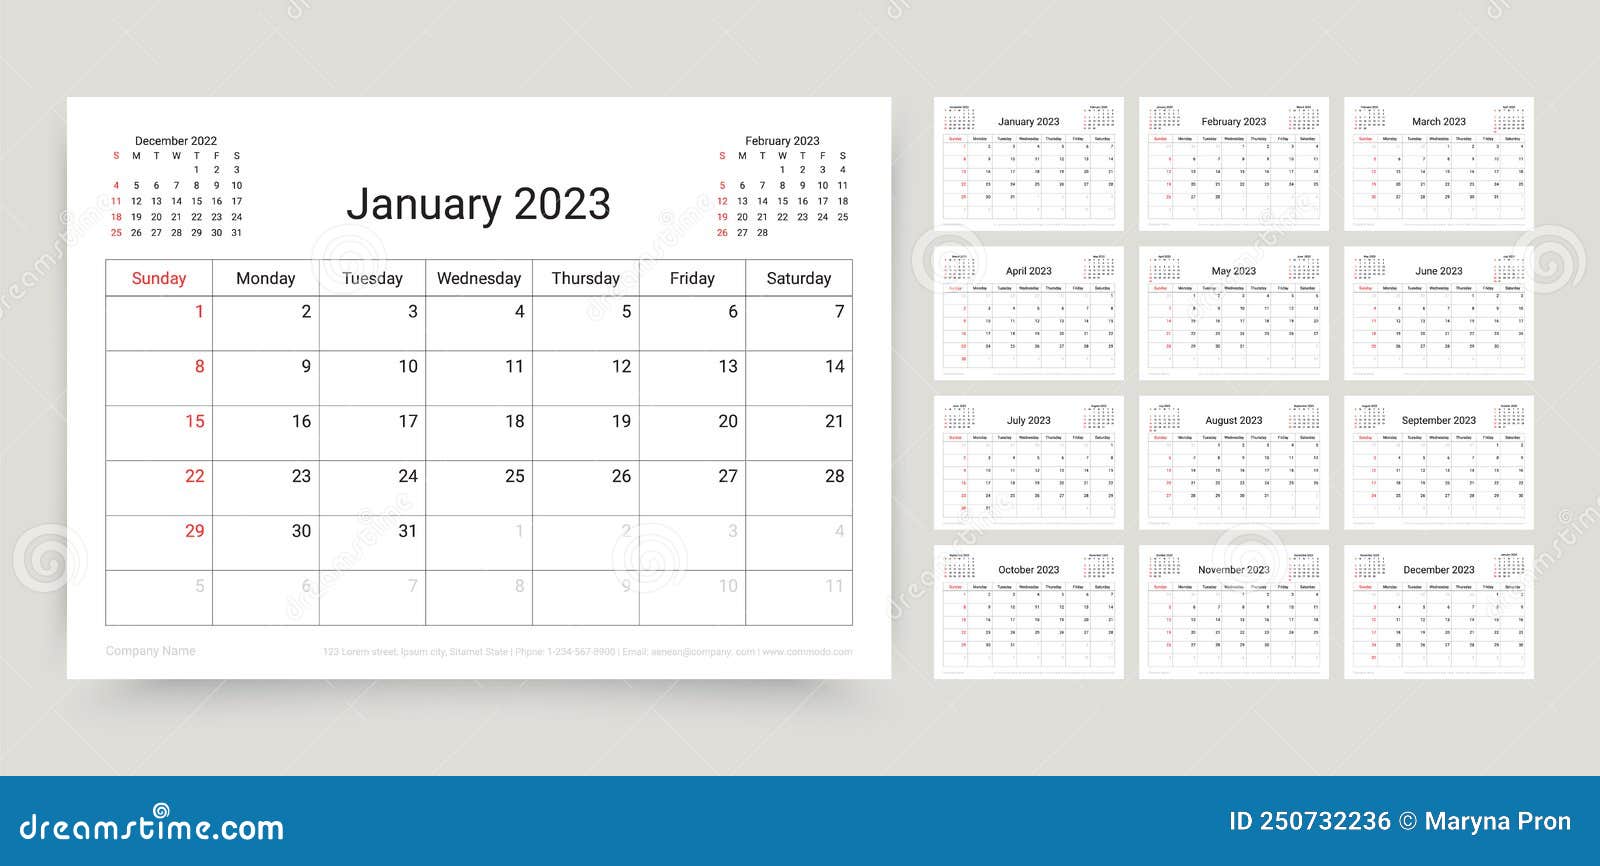 calendar-2023-year-planner-template-vector-illustration-monthly